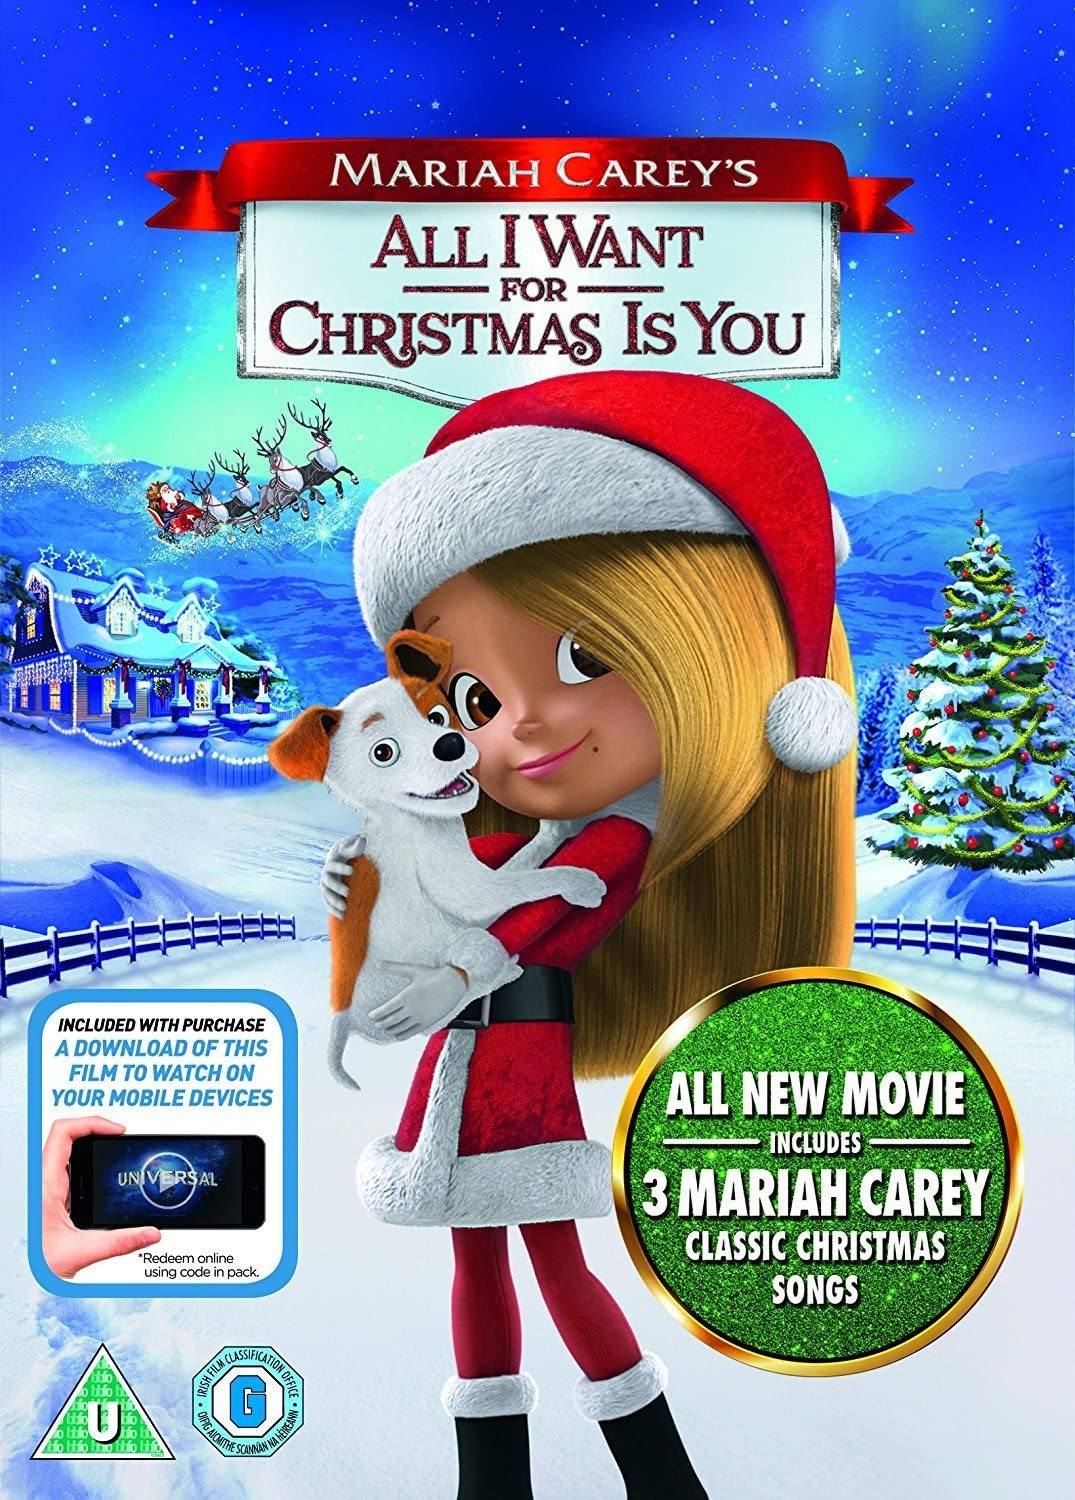 Mariah Carey's All I Want for Christmas is You [2017] - Animation [DVD]